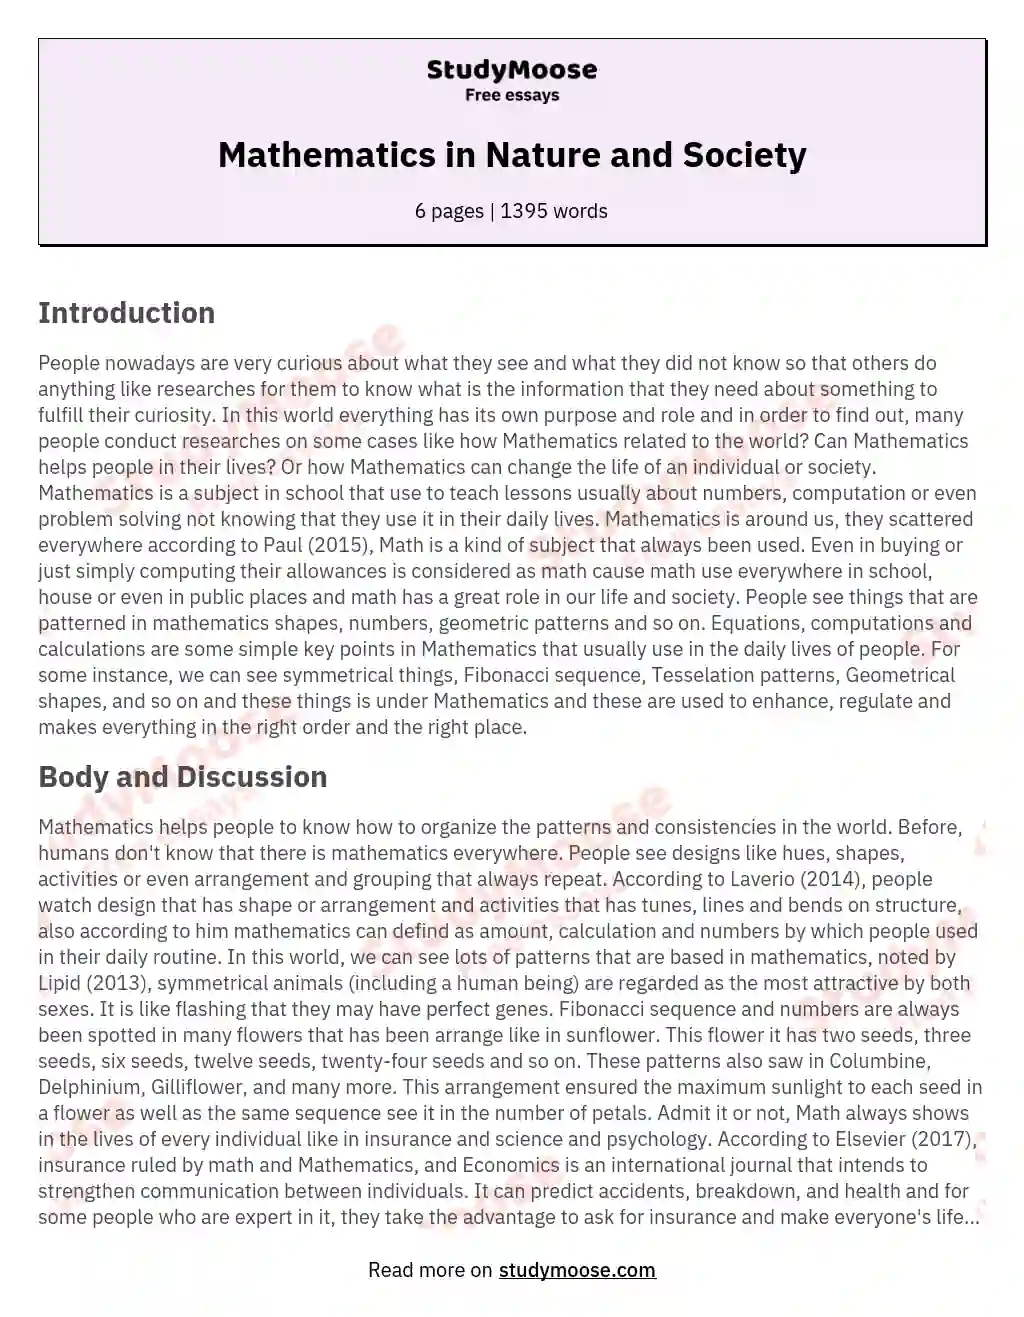 Mathematics in Nature and Society